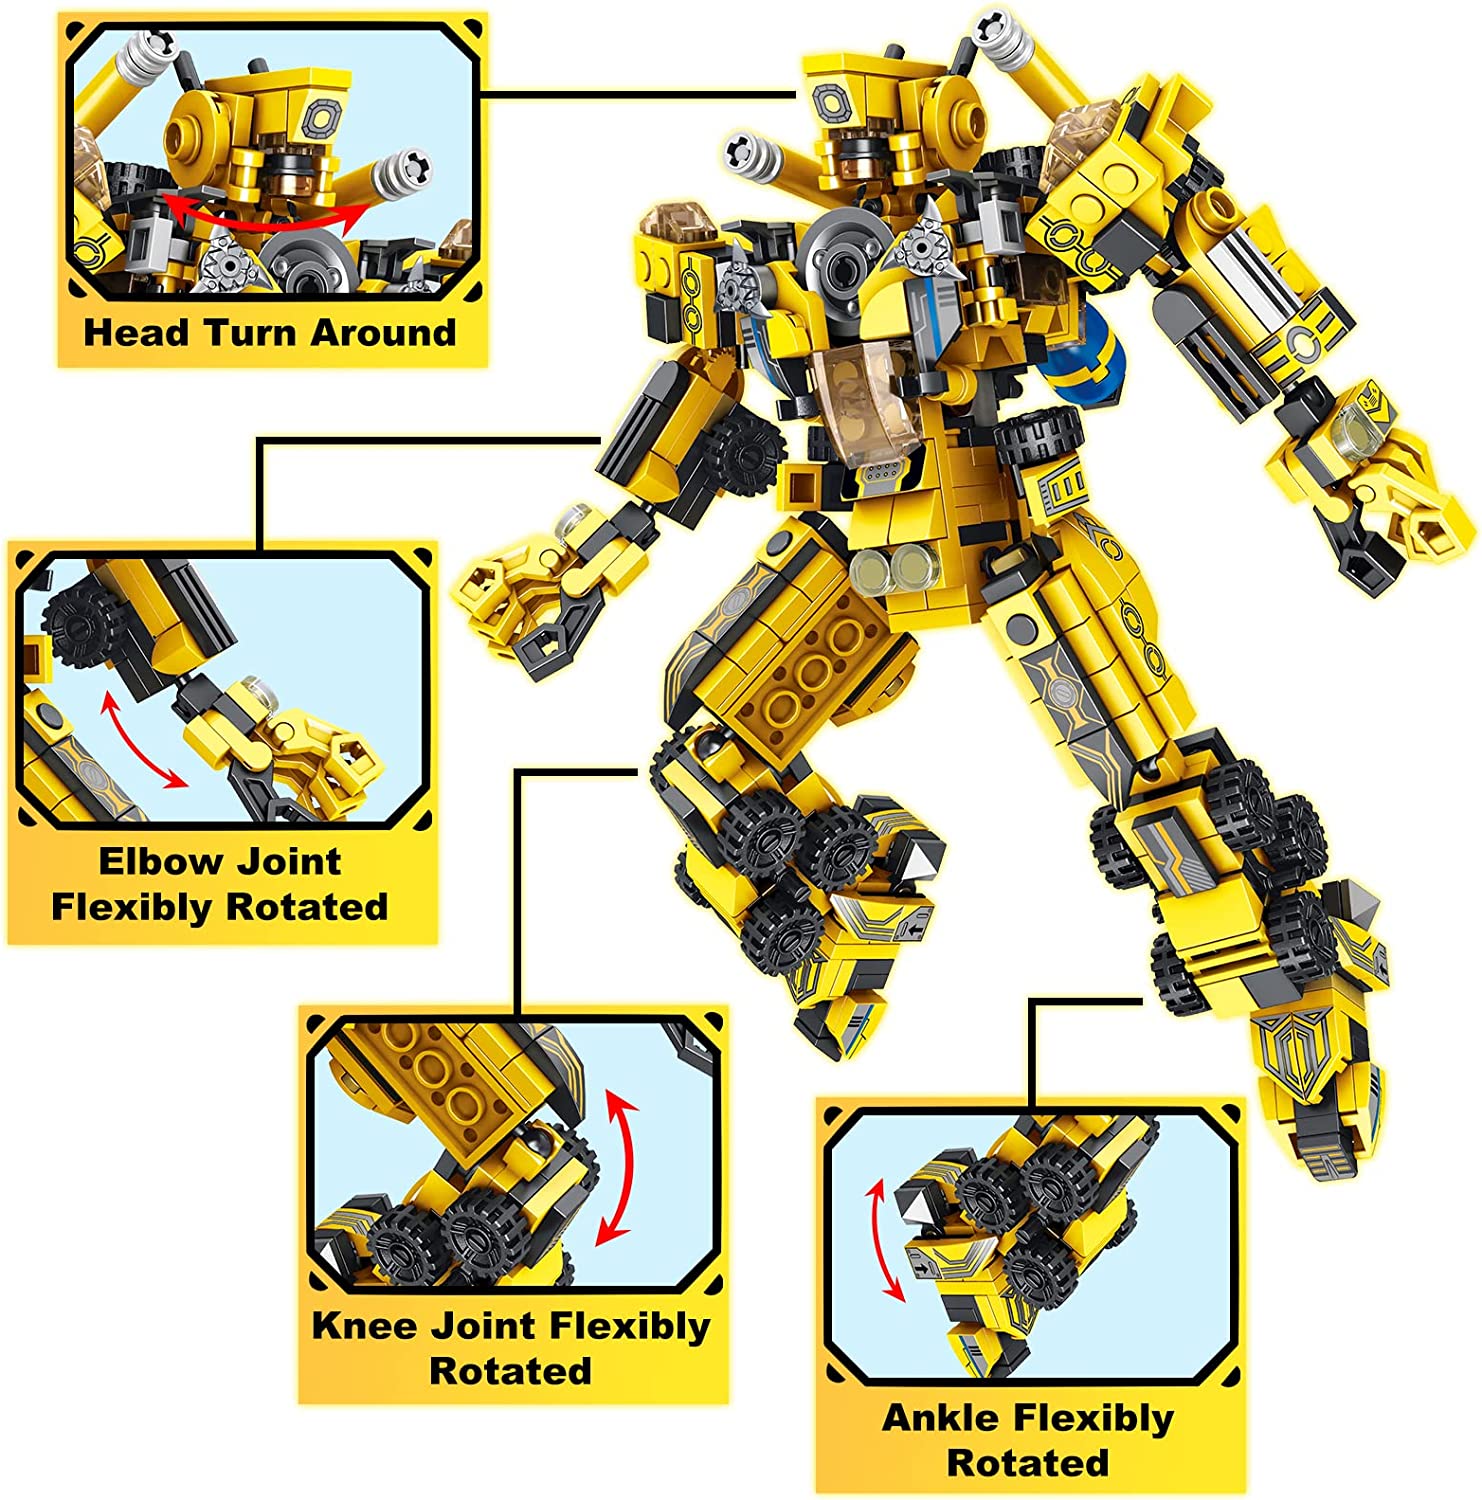 573 PCS Robot Building Toys, Learning STEM Robot Toys 25-in-1 Engineering Building Bricks Construction Vehicles Kit robot building for Age 6-12 Year Old Kids